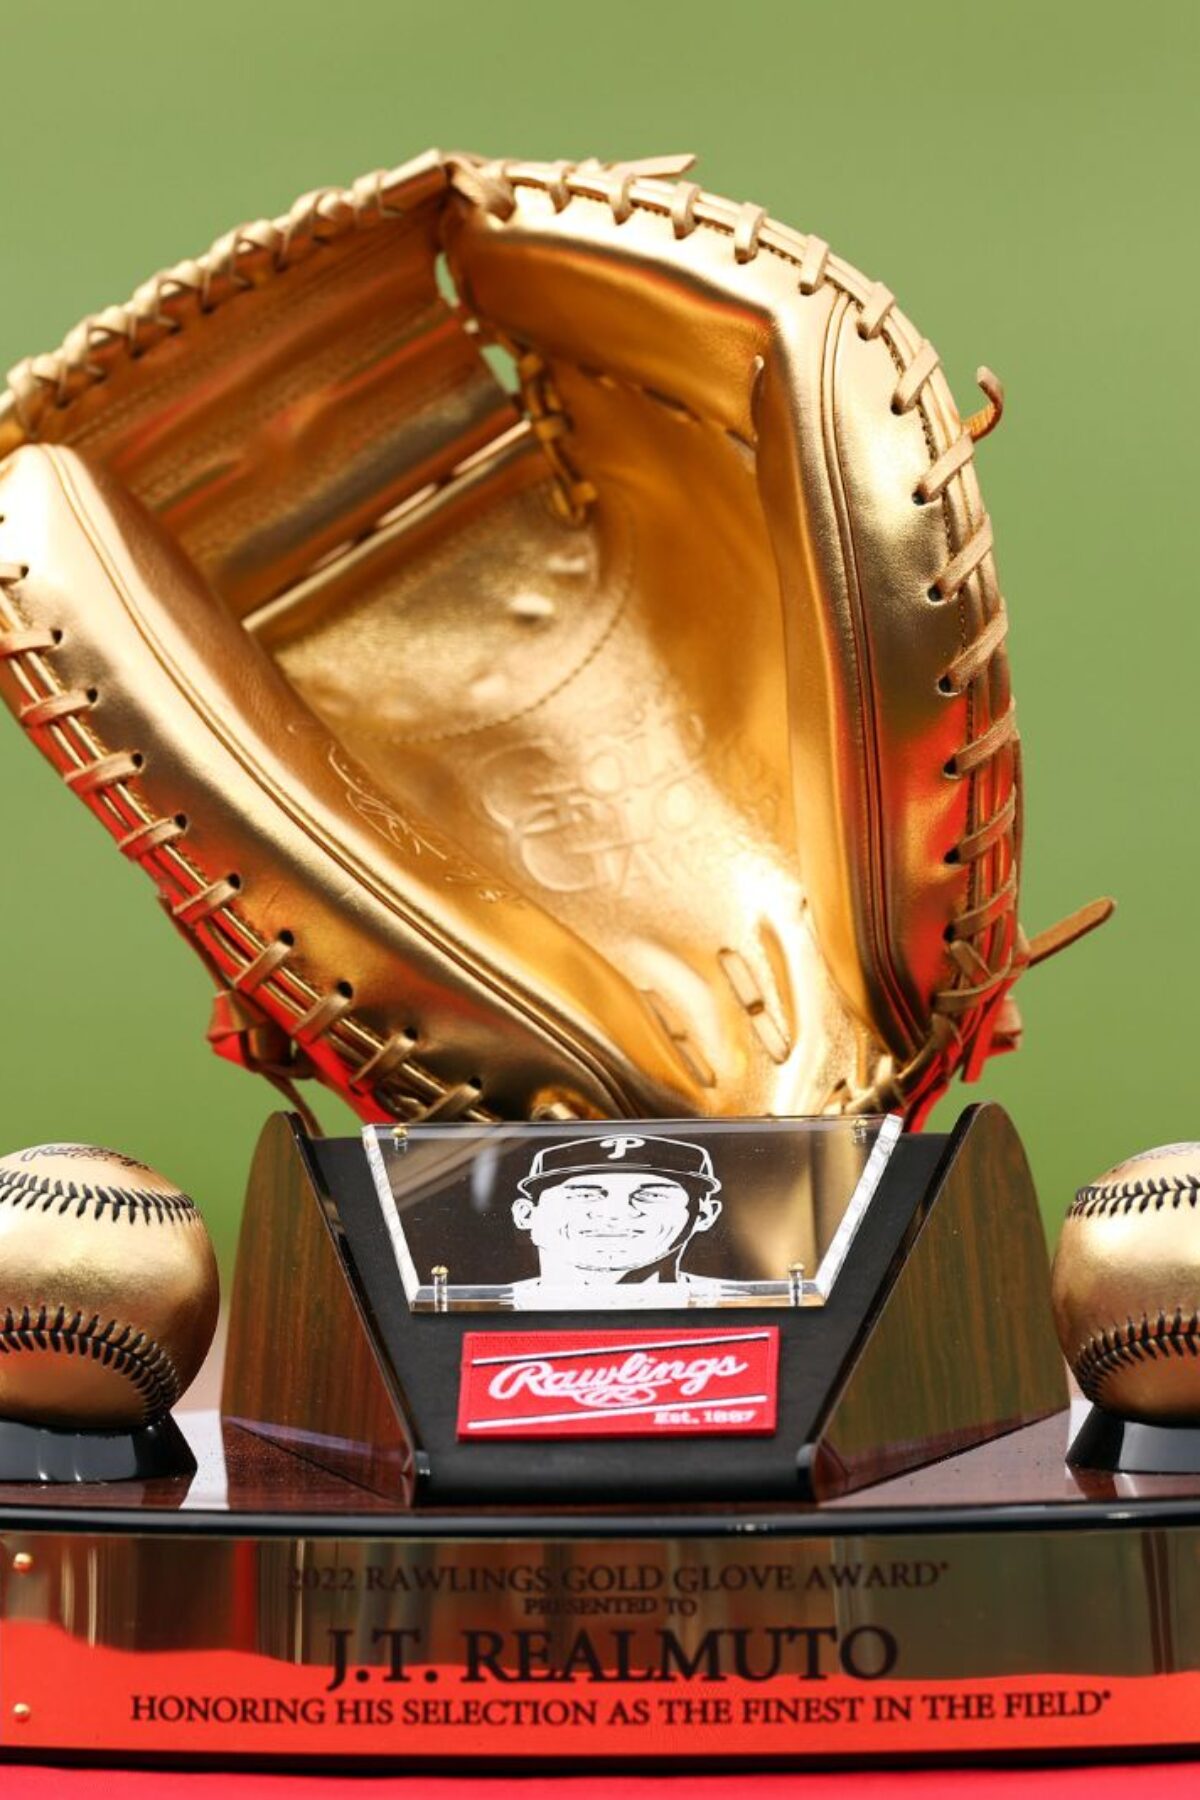 PHILADELPHIA, PENNSYLVANIA - APRIL 08: A Gold Glove award for J.T. Realmuto #10 of the Philadelphia Phillies is seen at Citizens Bank Park on April 08, 2023 in Philadelphia, Pennsylvania. (Photo by Tim Nwachukwu/Getty Images)